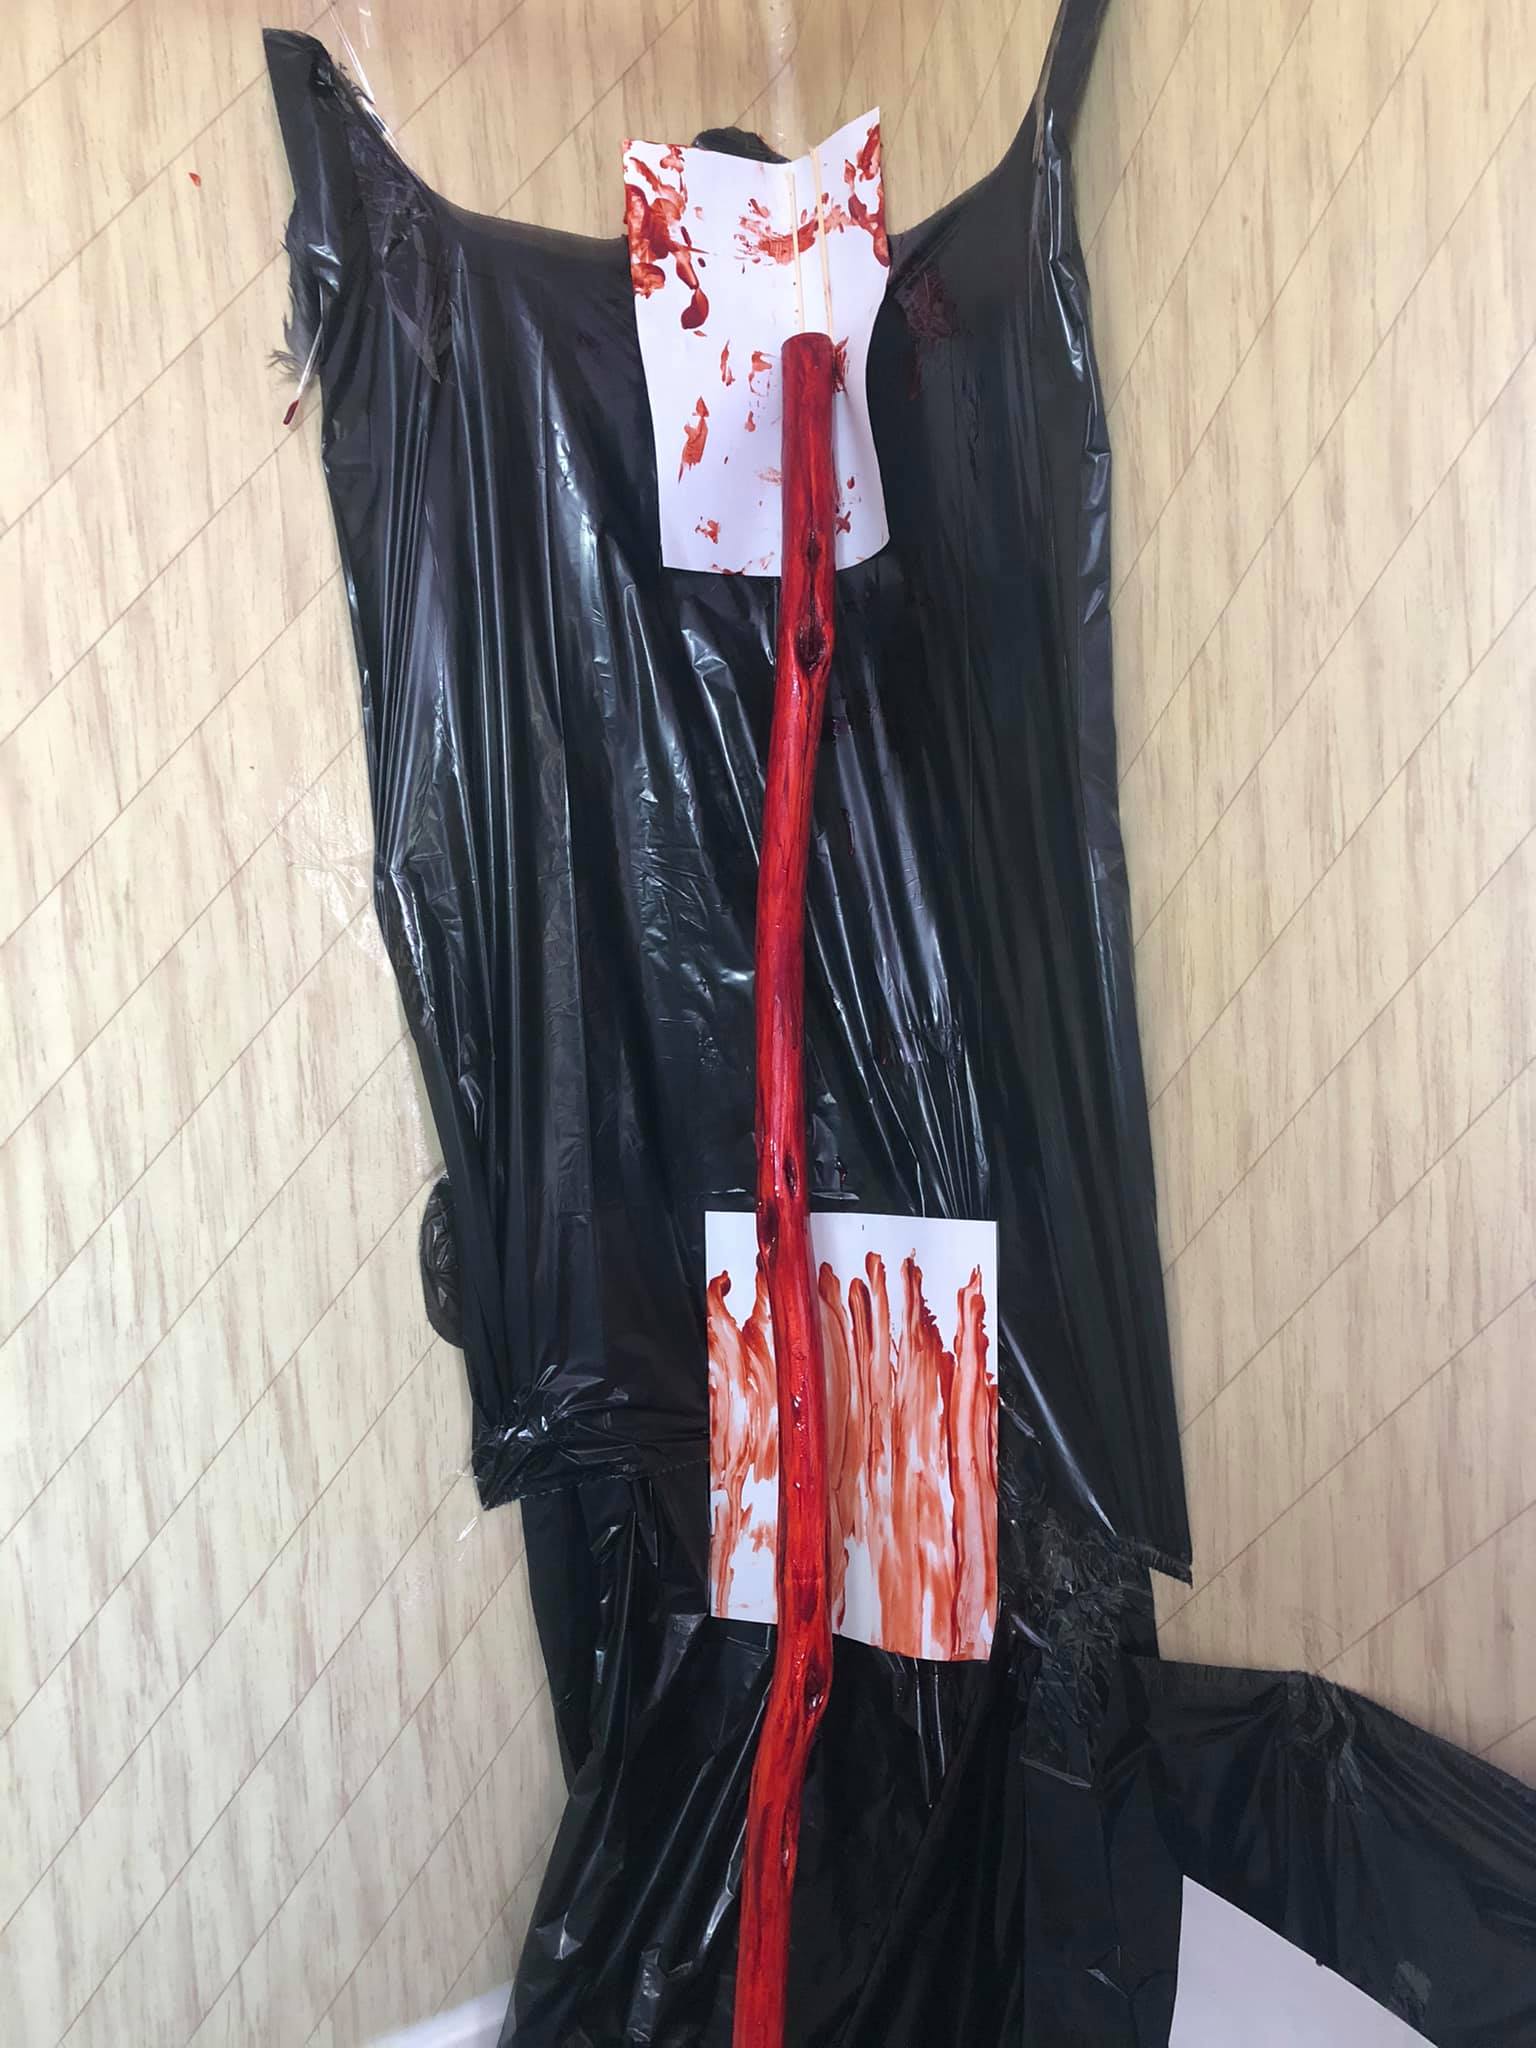 A red staff leaning up against a corner of a bathtub wall, black garbage bags painted to the wall to protect them. Bizarre, blood covered canvases are behind the staff.